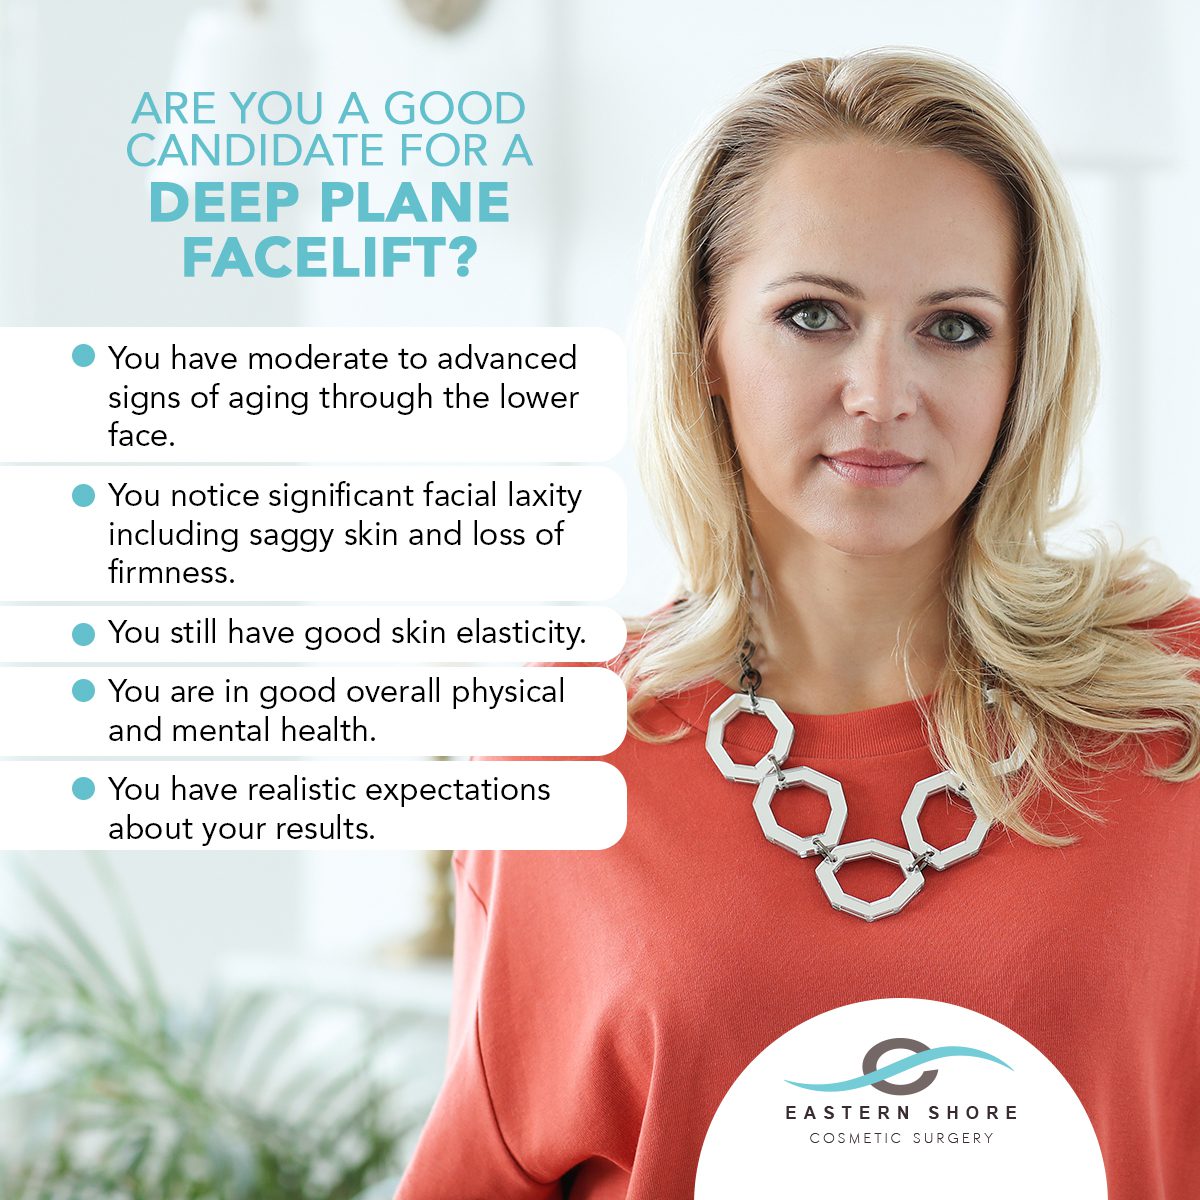 Are You a Good Candidate for a Deep Plane Facelift? [Infographic]